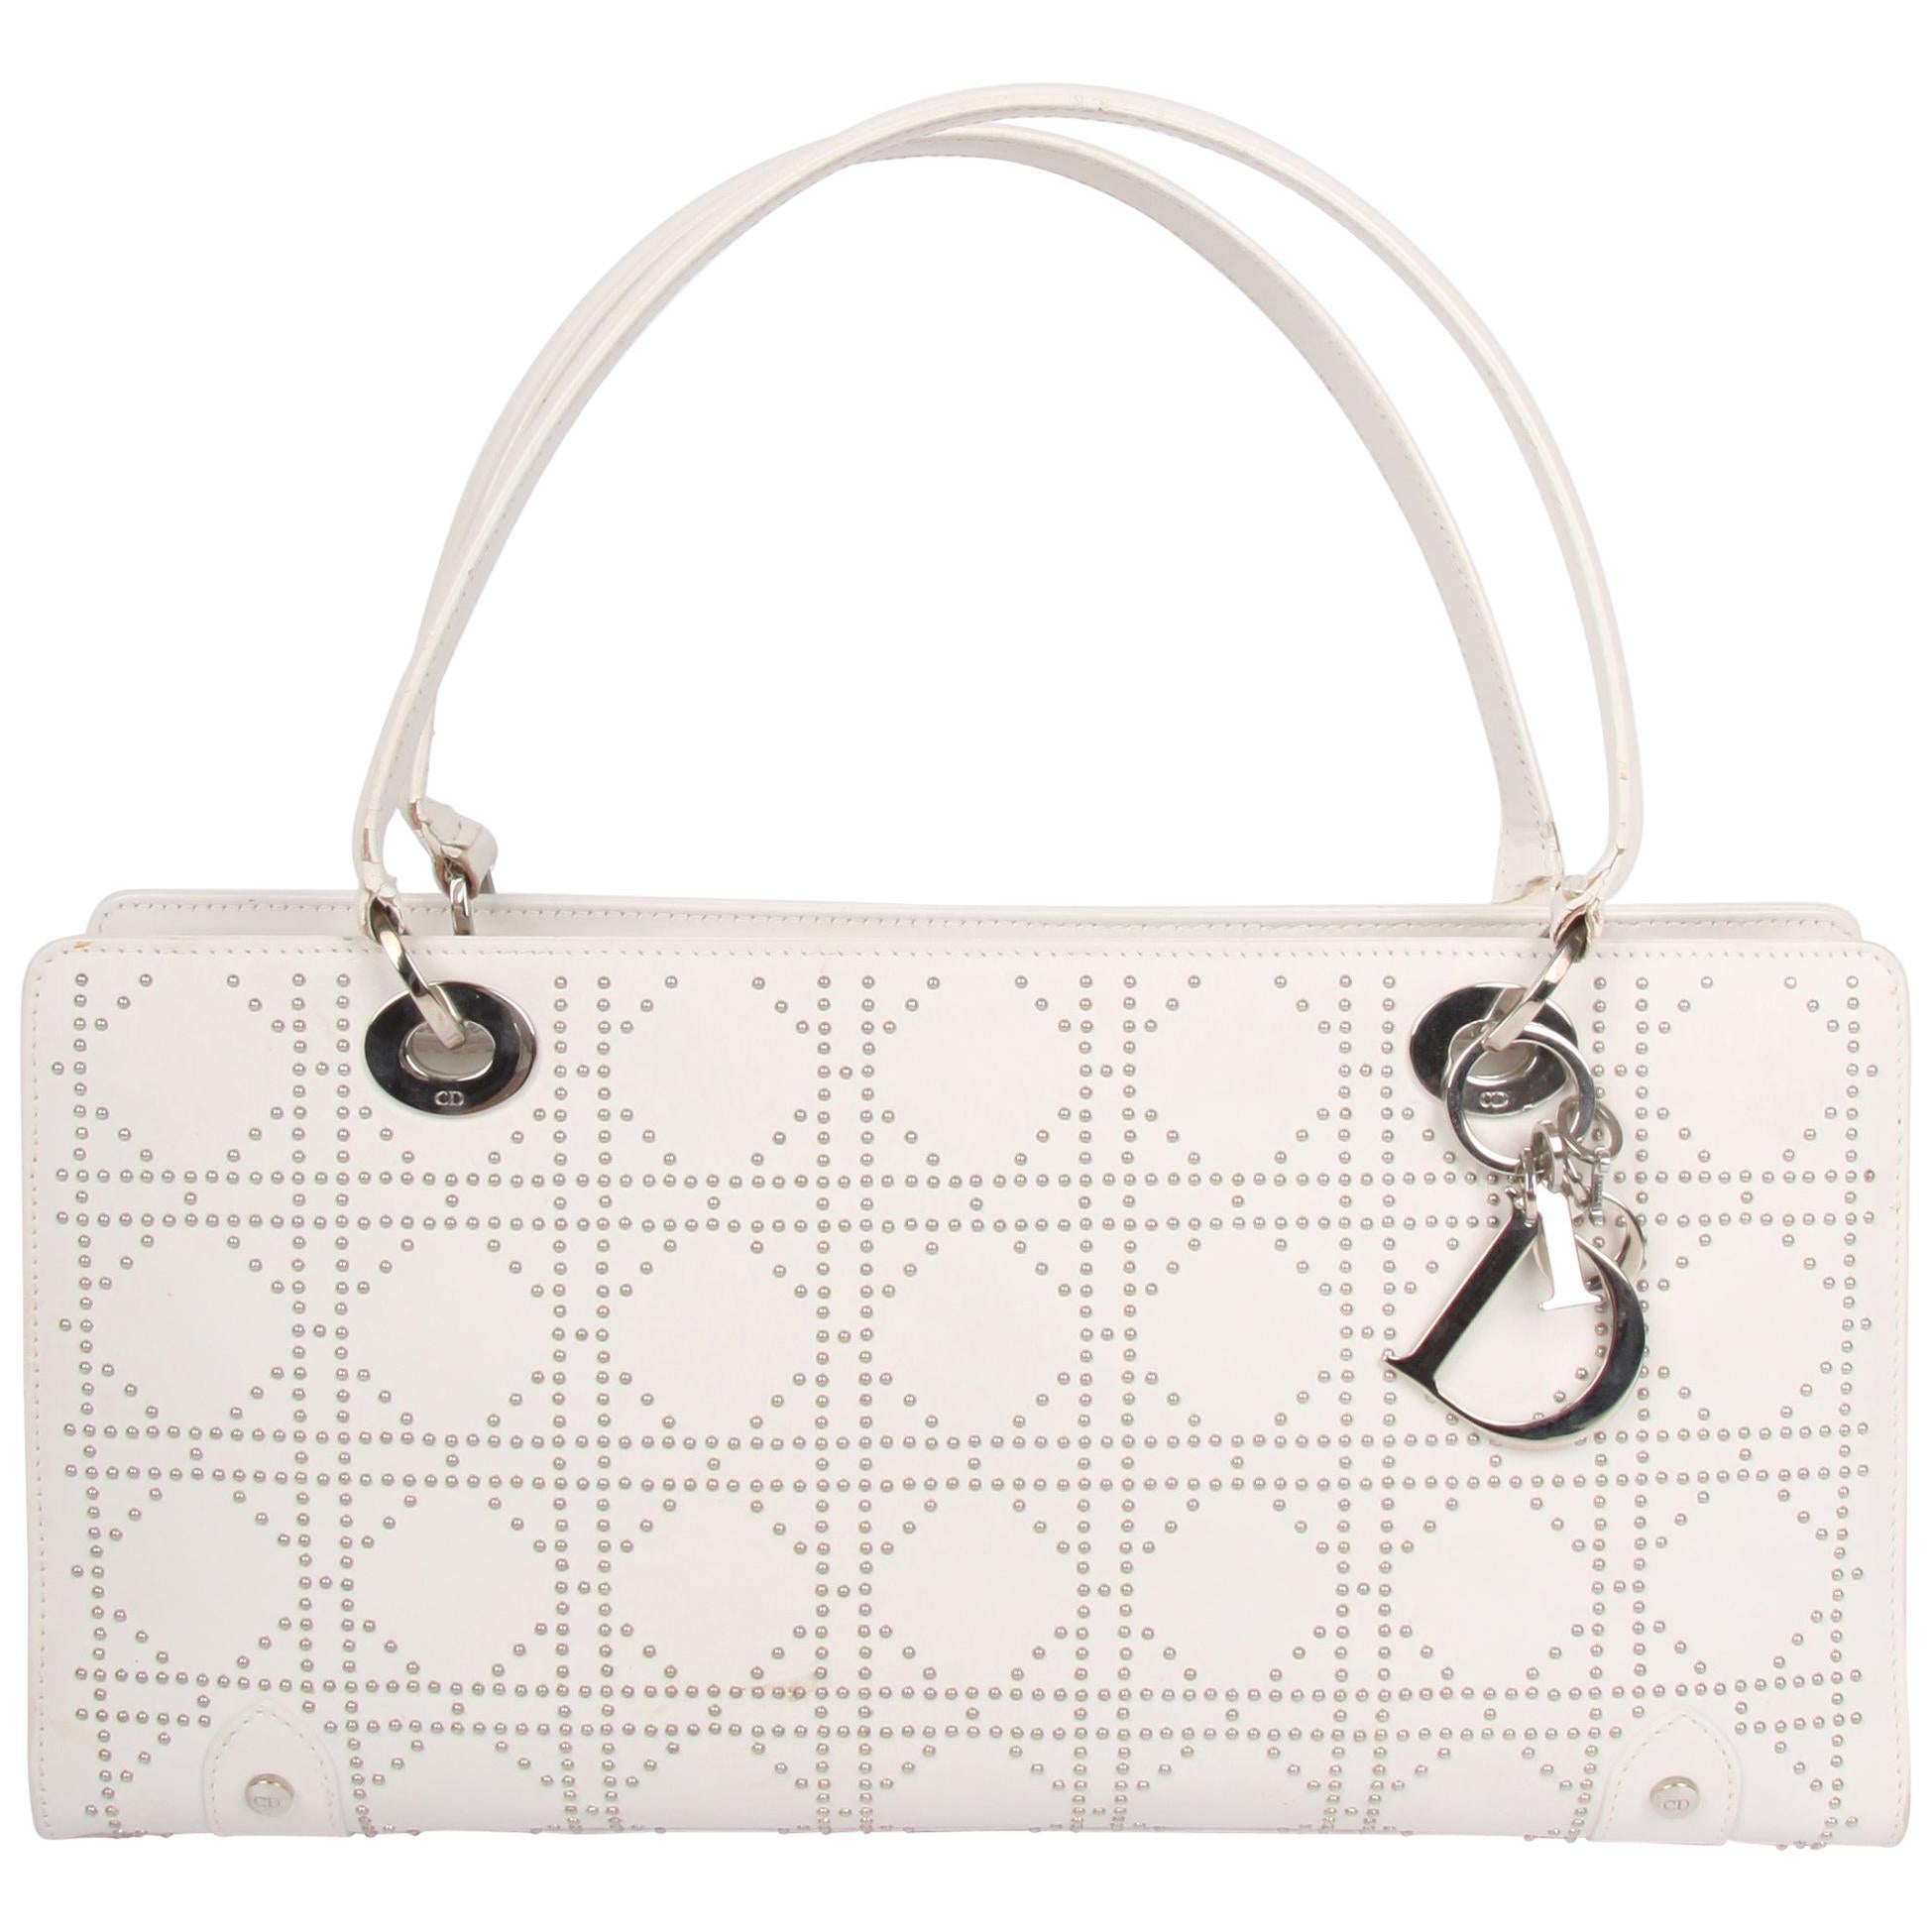 Lady Dior white leather East West Studded Bag 